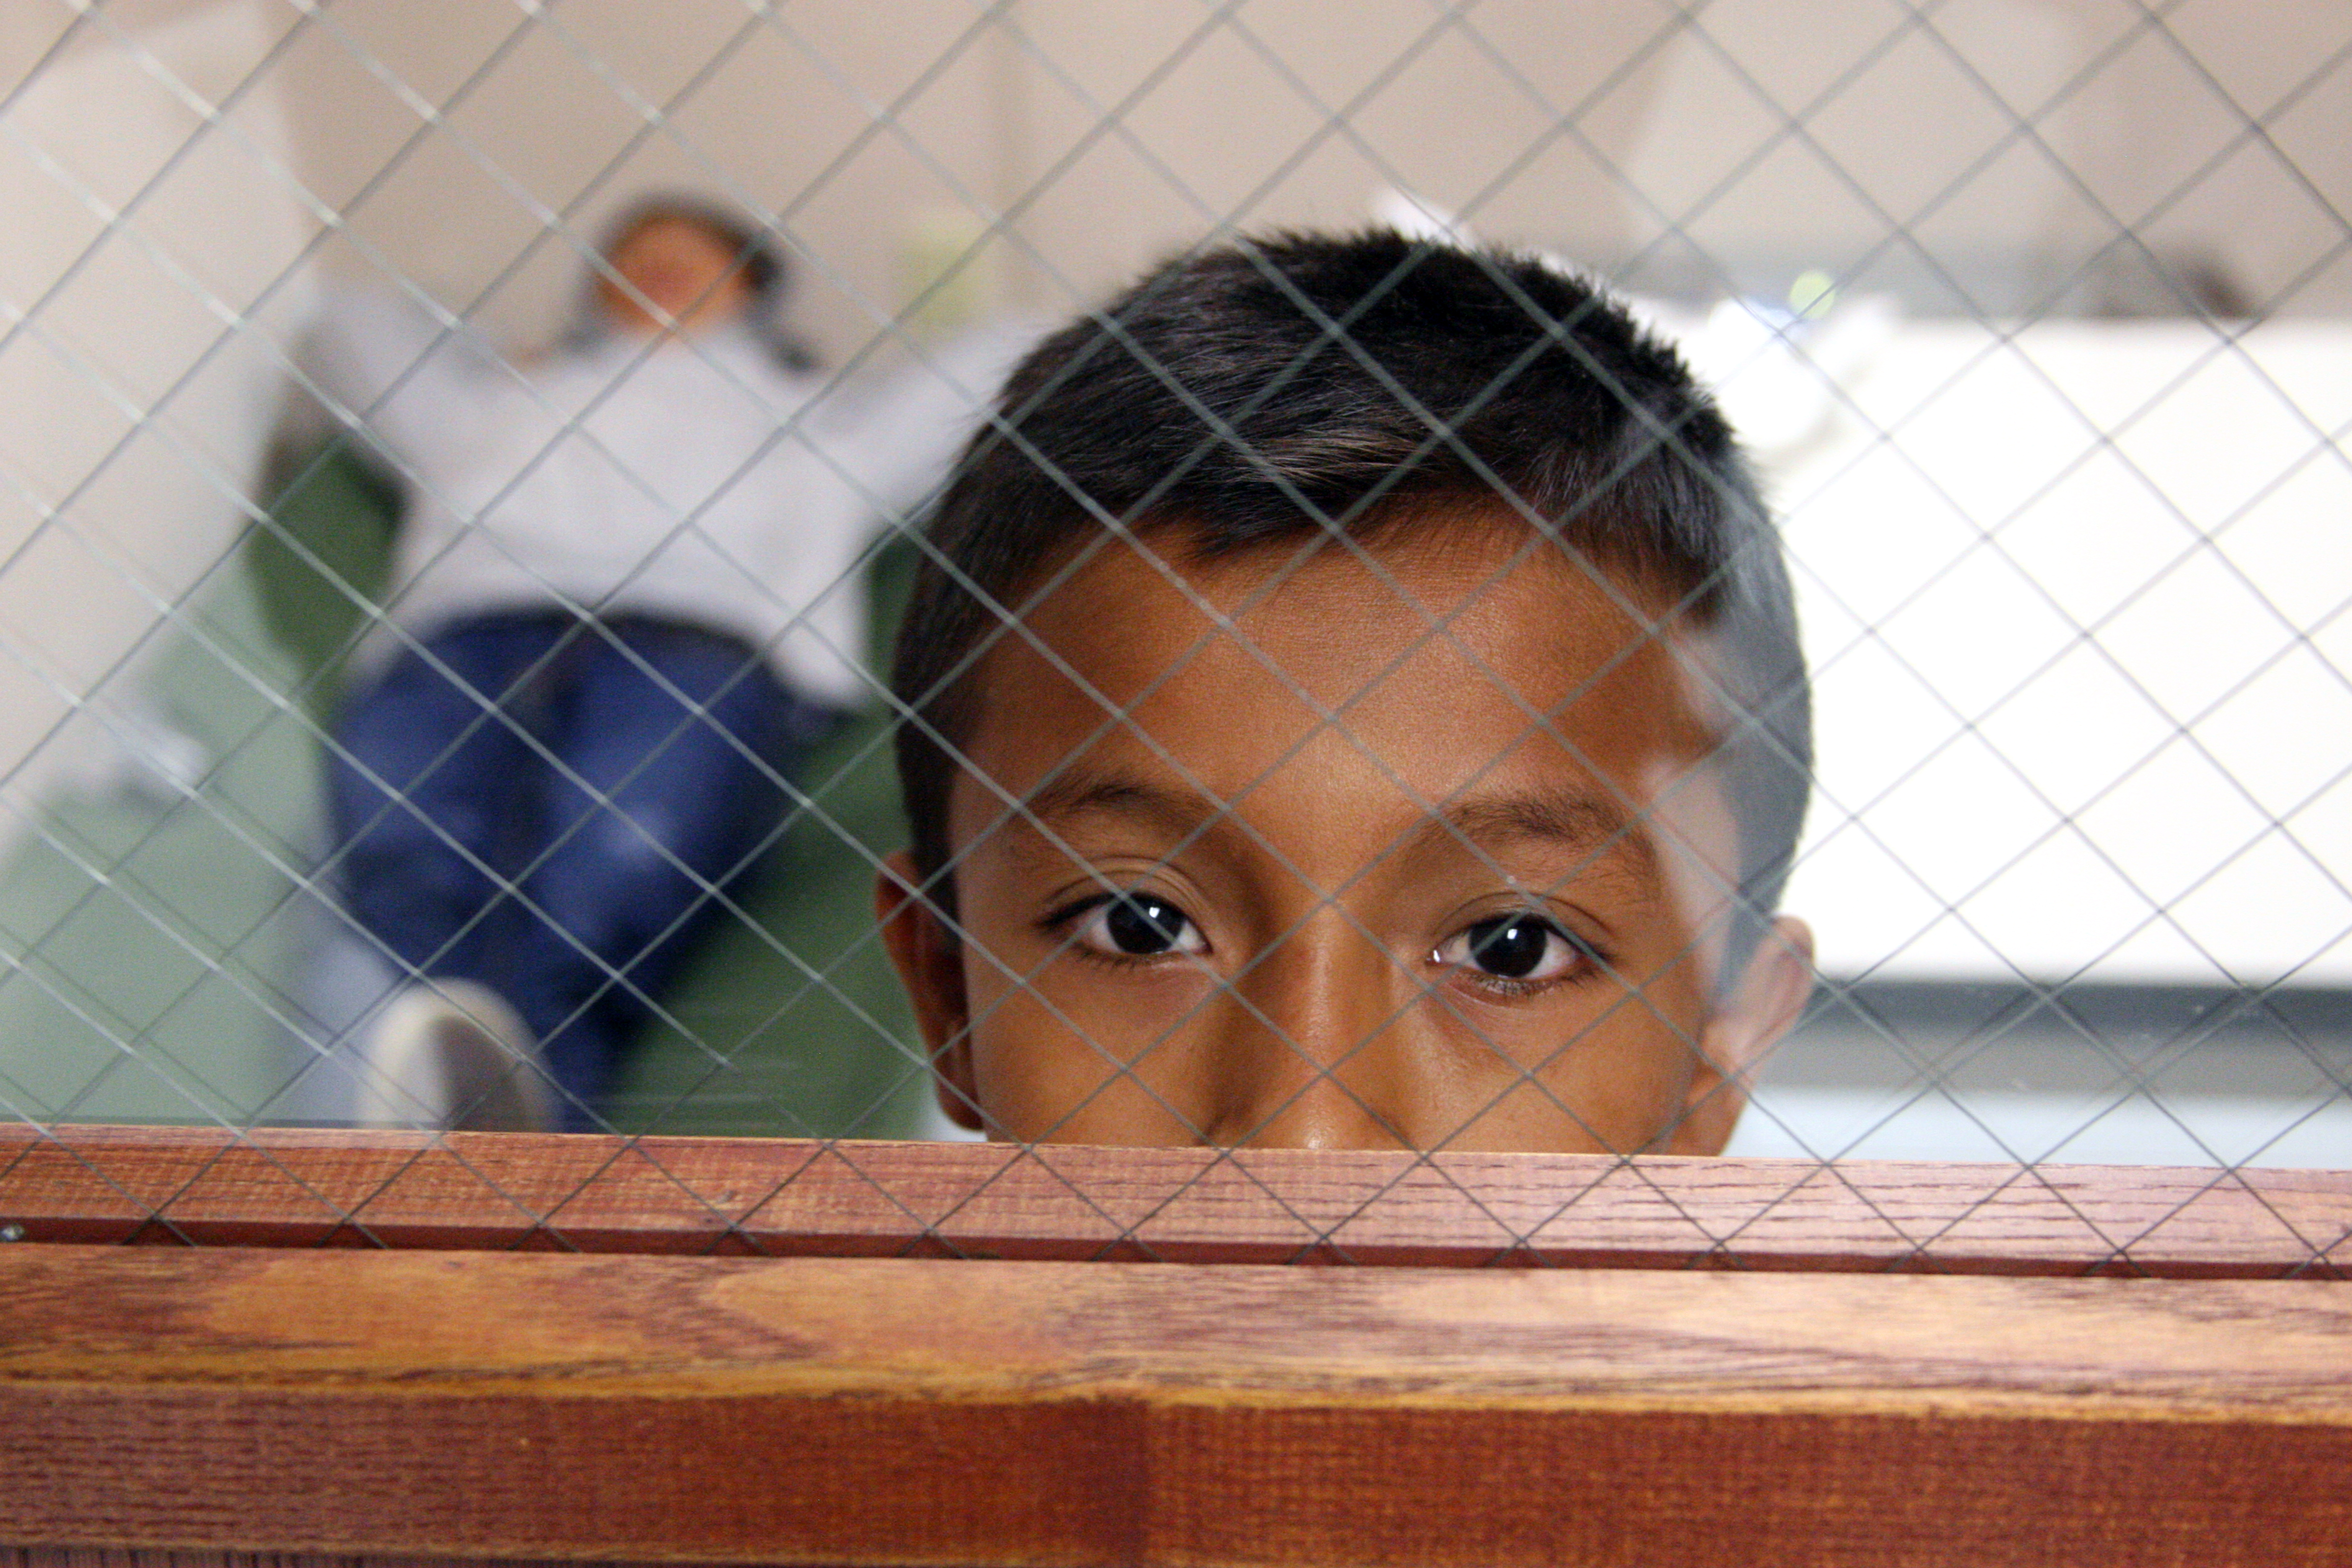 A youngster looks out the door window from the room he is staying in at the Brownsville, Texas port of entry. (Photo by Eduardo Perez)